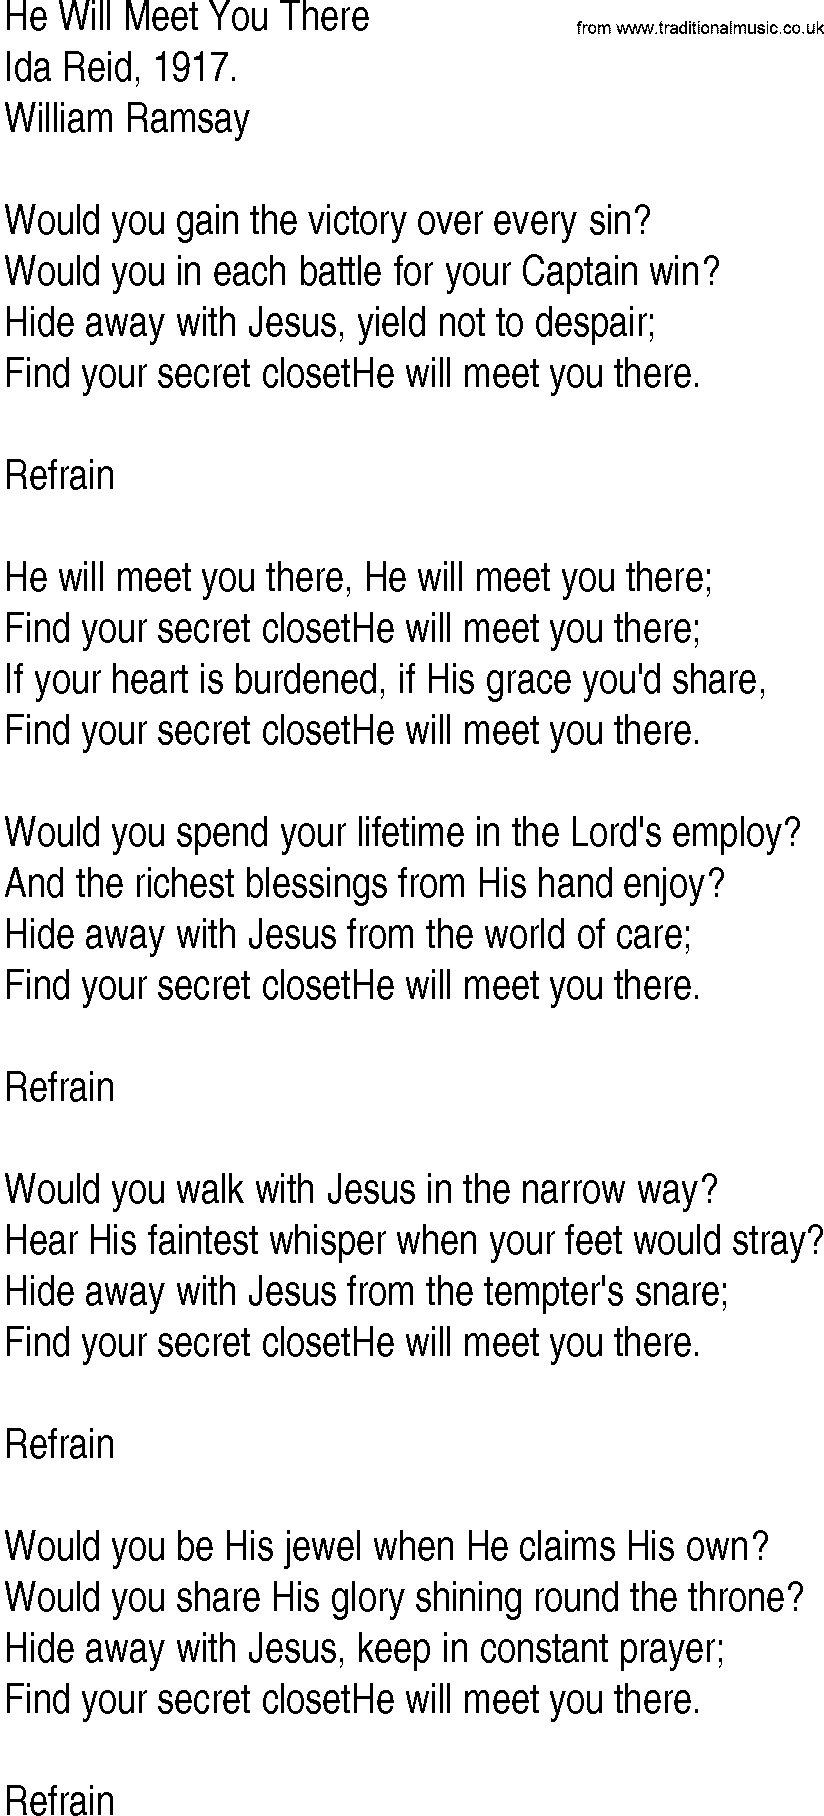 Hymn and Gospel Song: He Will Meet You There by Ida Reid lyrics